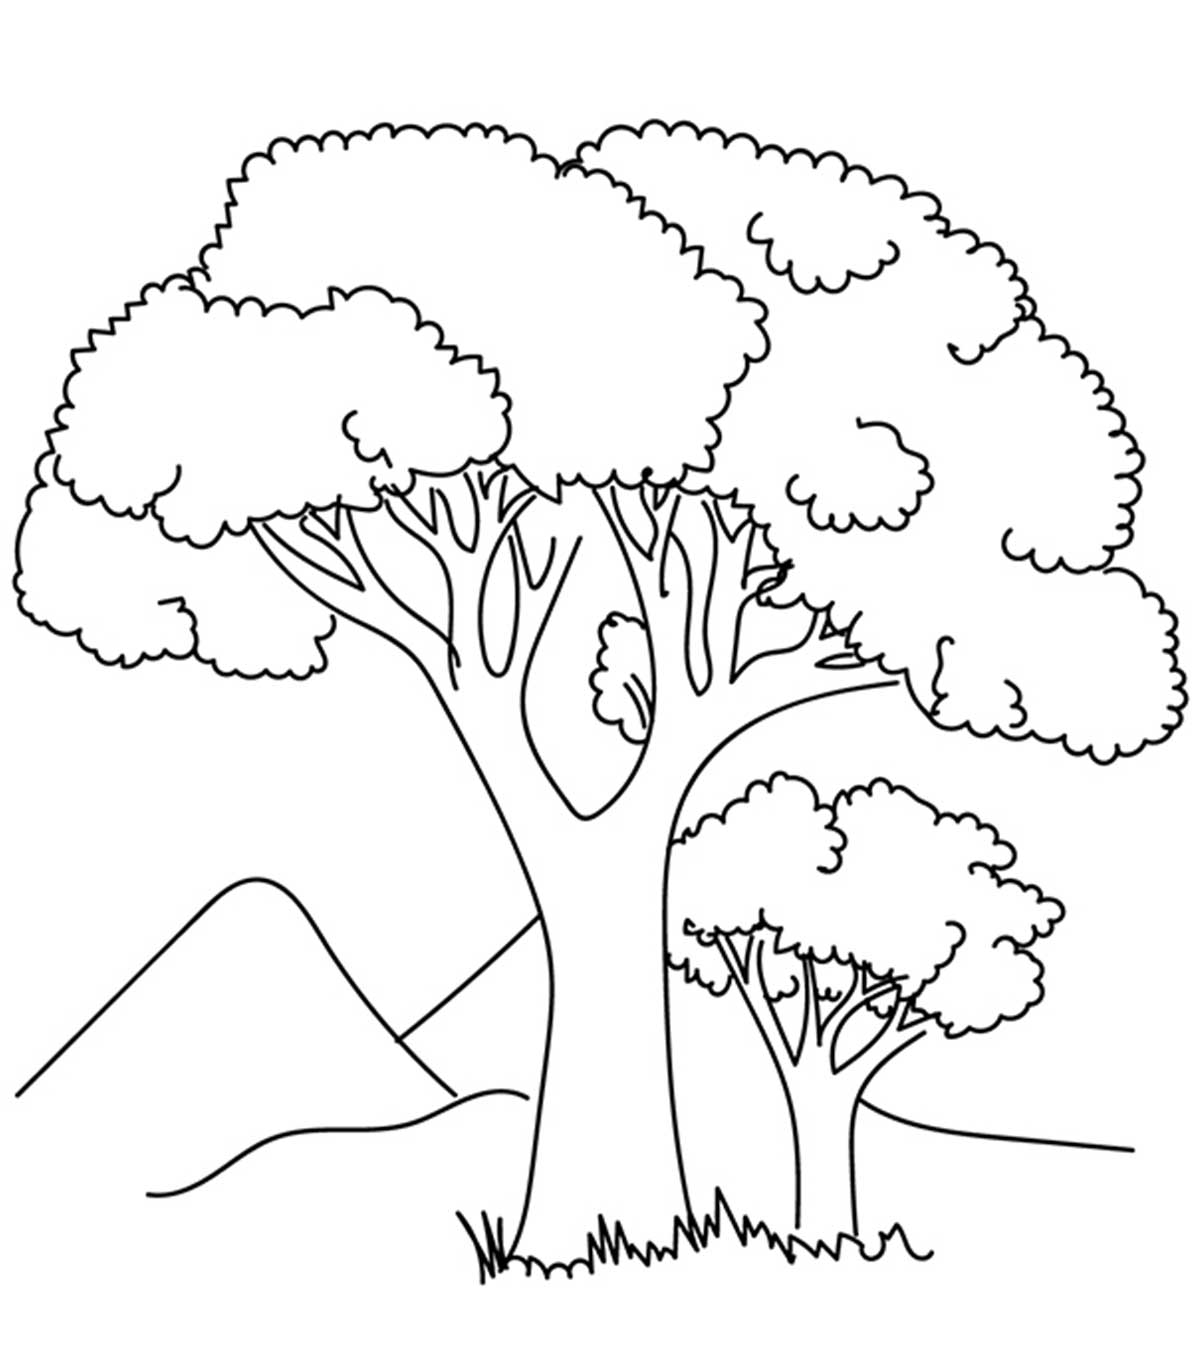 Coloring Tree Images 7